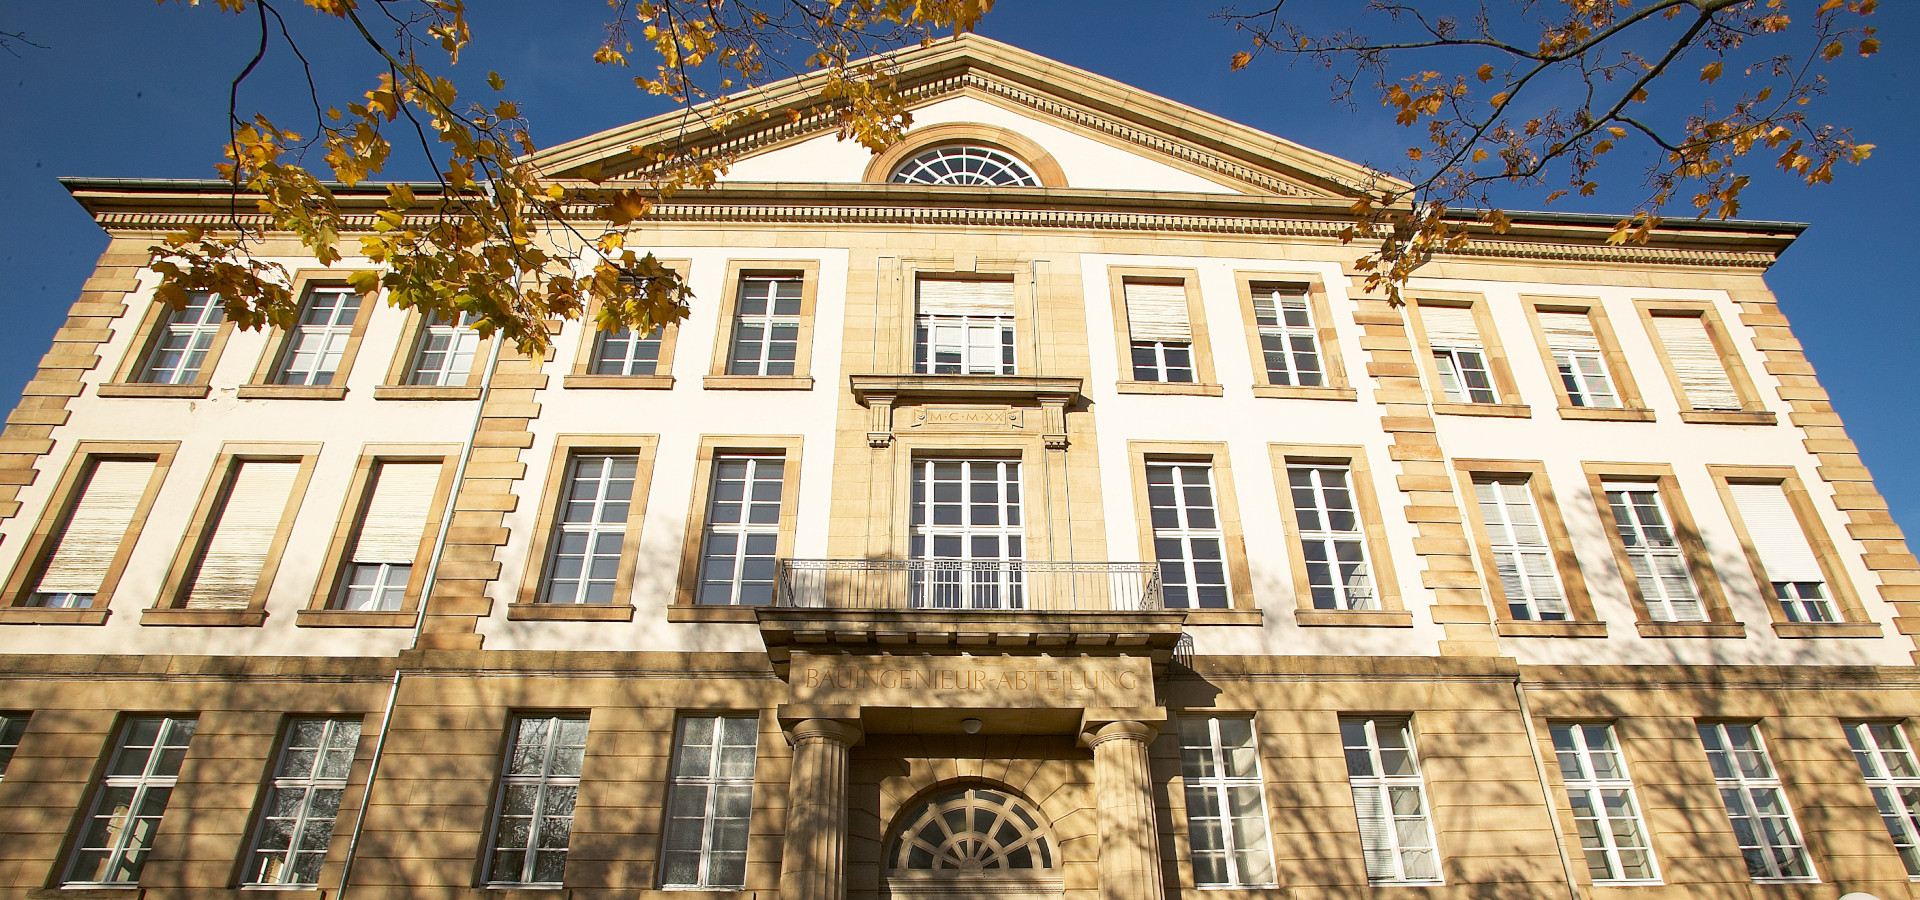 The outer facade of the University of Karlsruhe.